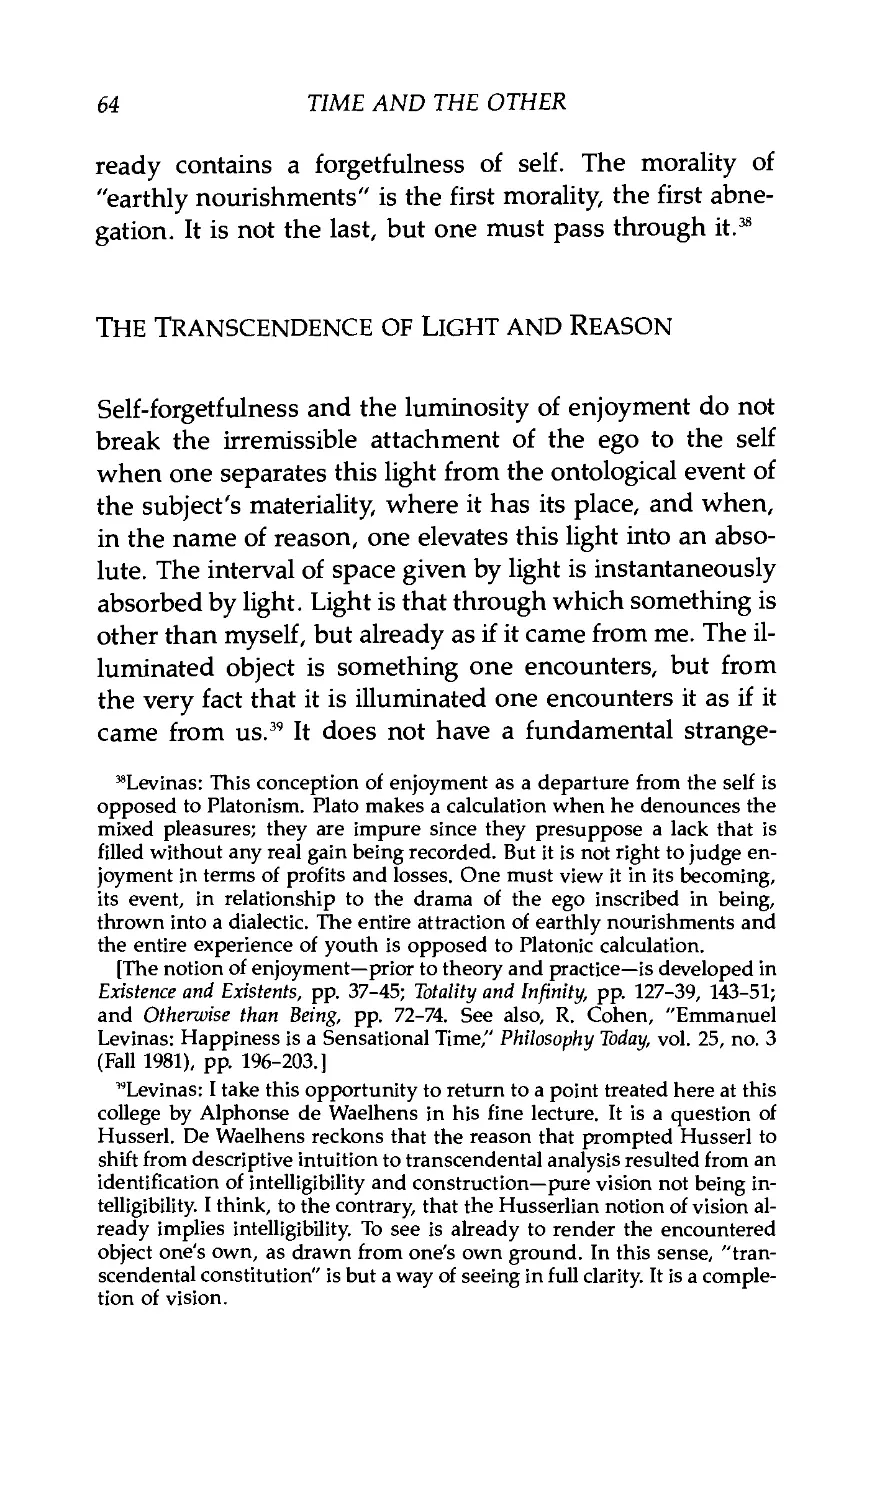 The Transcendence of Light and Reason